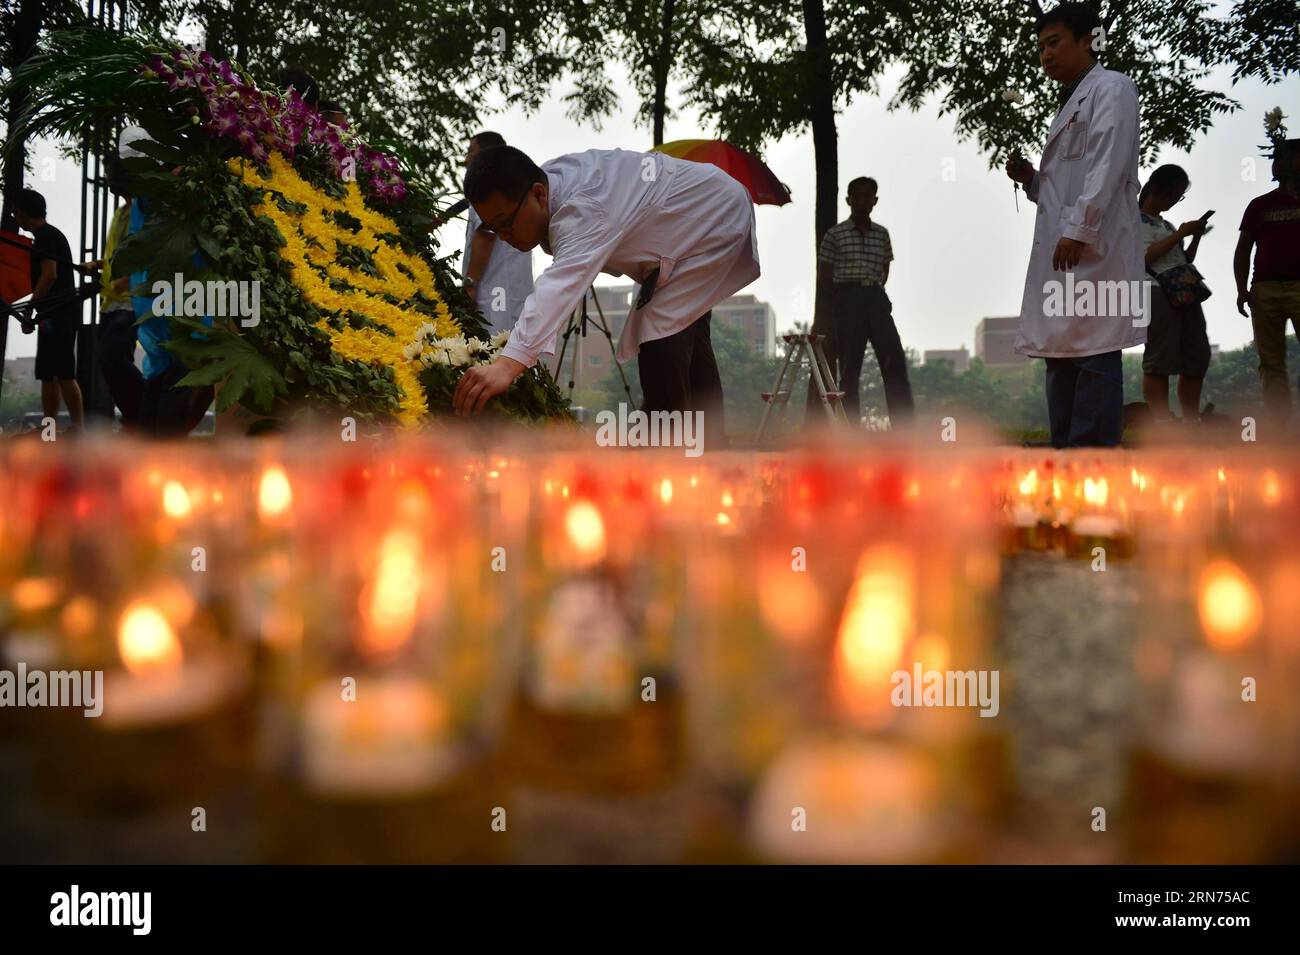 (150818) -- TIANJIN, Aug. 18, 2015 -- A mourning ceremony is held for the victims of the massive warehouse explosions at Taida Hospital near the explosion site in Tianjin, north China, Aug. 18, 2015. The death toll from last week s massive blasts in Tianjin rose to 114.) (wyo) CHINA-TIANJIN-EXPLOSION-MOURNING (CN) YouxSixing PUBLICATIONxNOTxINxCHN   150818 Tianjin Aug 18 2015 a Mourning Ceremony IS Hero for The Victims of The Massive Warehouse Explosions AT Taida Hospital Near The Explosion Site in Tianjin North China Aug 18 2015 The Death toll from Load Week S Massive BLAST in Tianjin Rose to Stock Photo